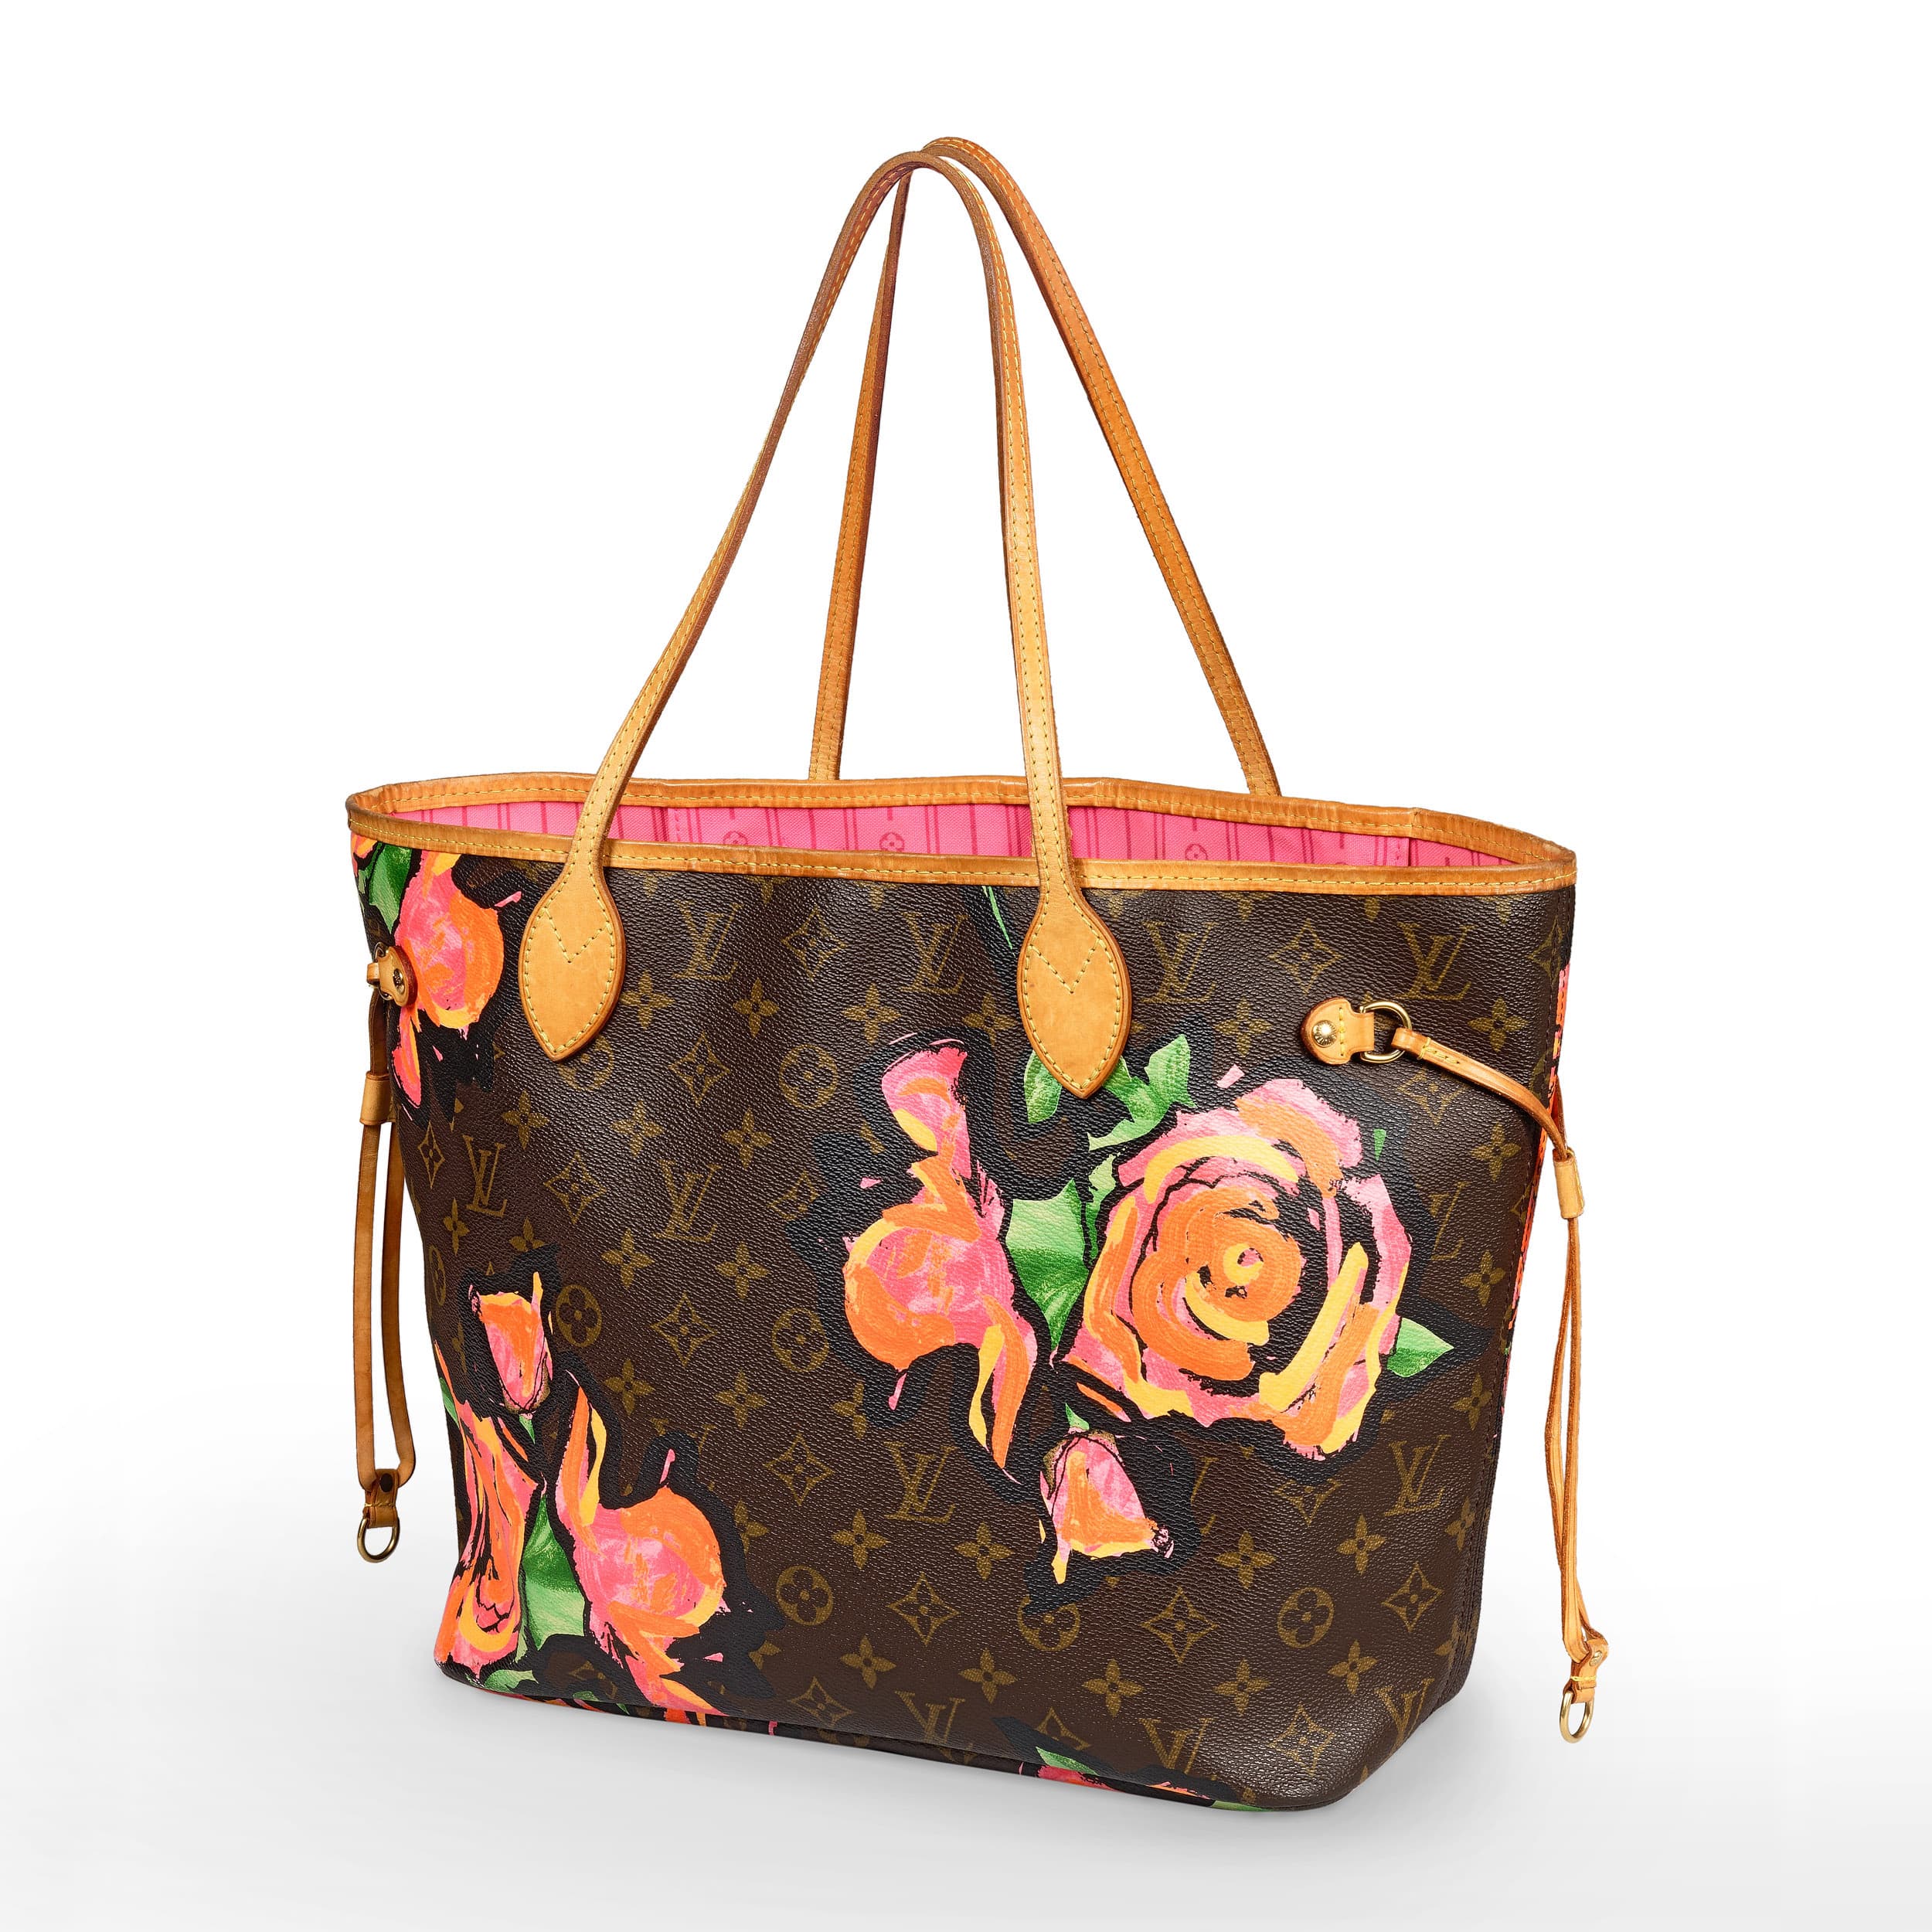 Sold at Auction: Louis Vuitton, Louis Vuitton Neverfull Limited